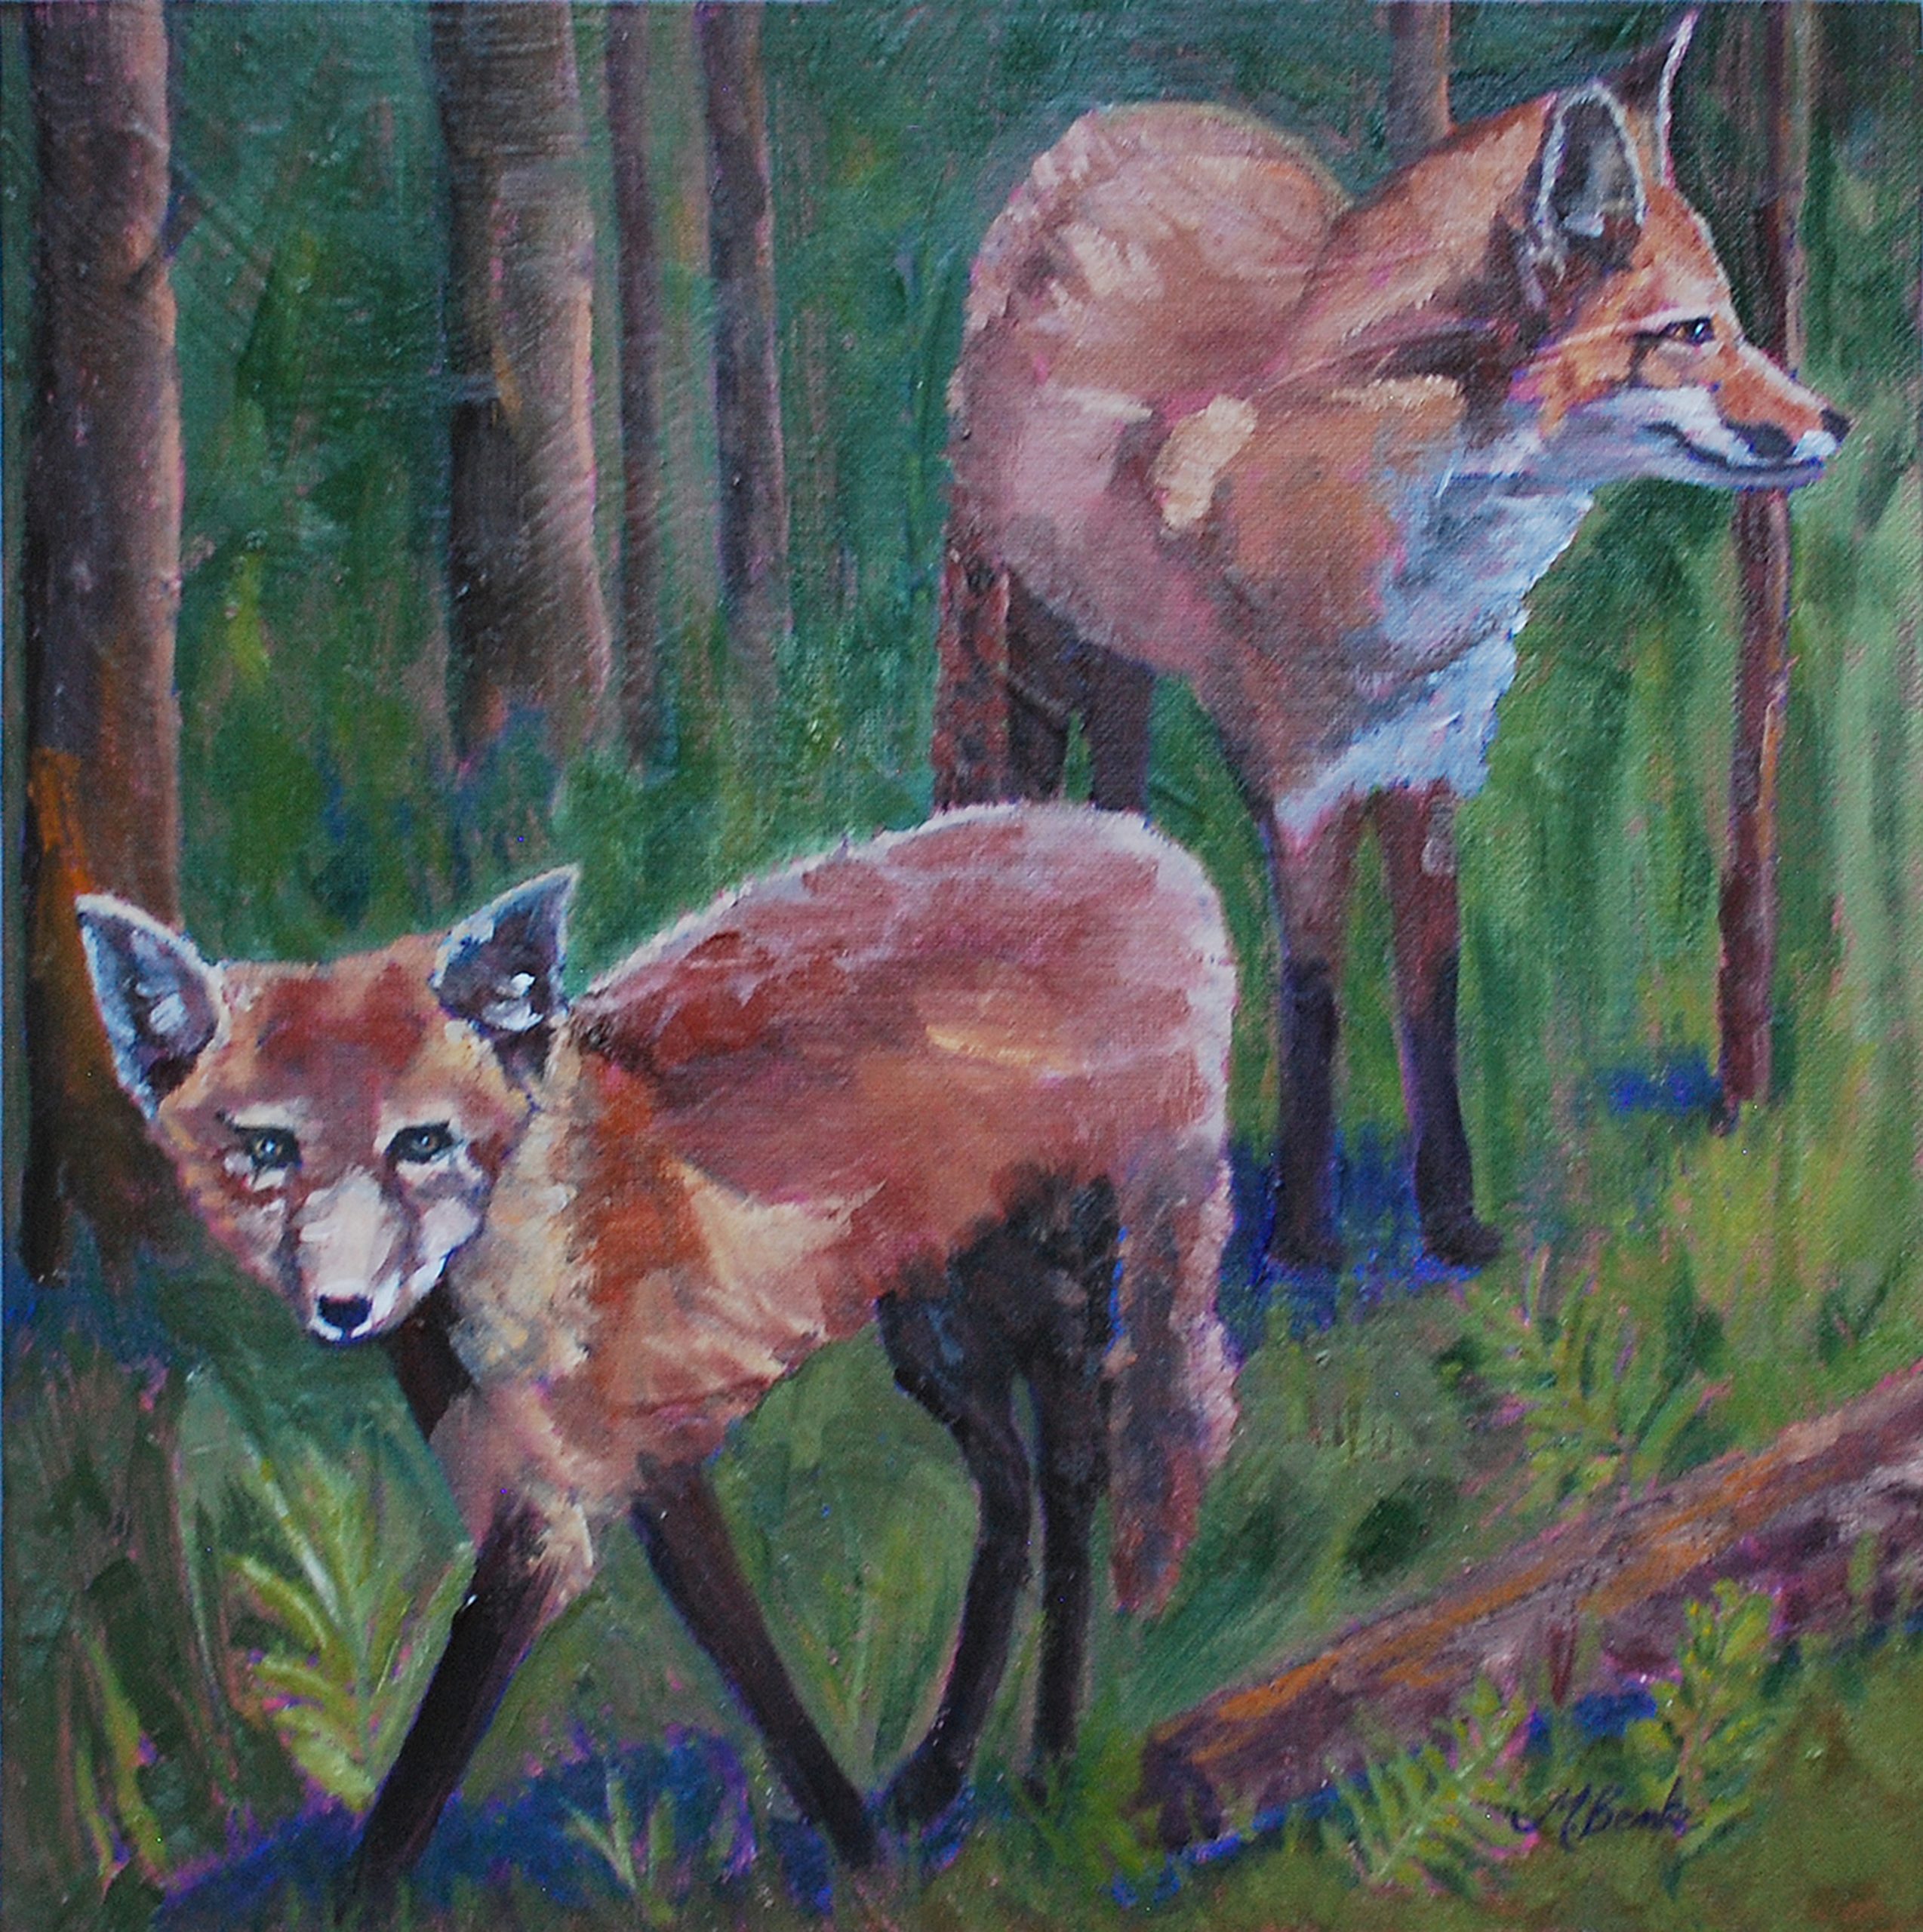 For anyone who loves foxes, this striking oil painting features a pair of kits out looking for adventure as they emerge from a deep green forest. Their fur is painted with strong brushstrokes in various shade of red, making a strong contrast with violet shadows and green foliage by Mary Benke